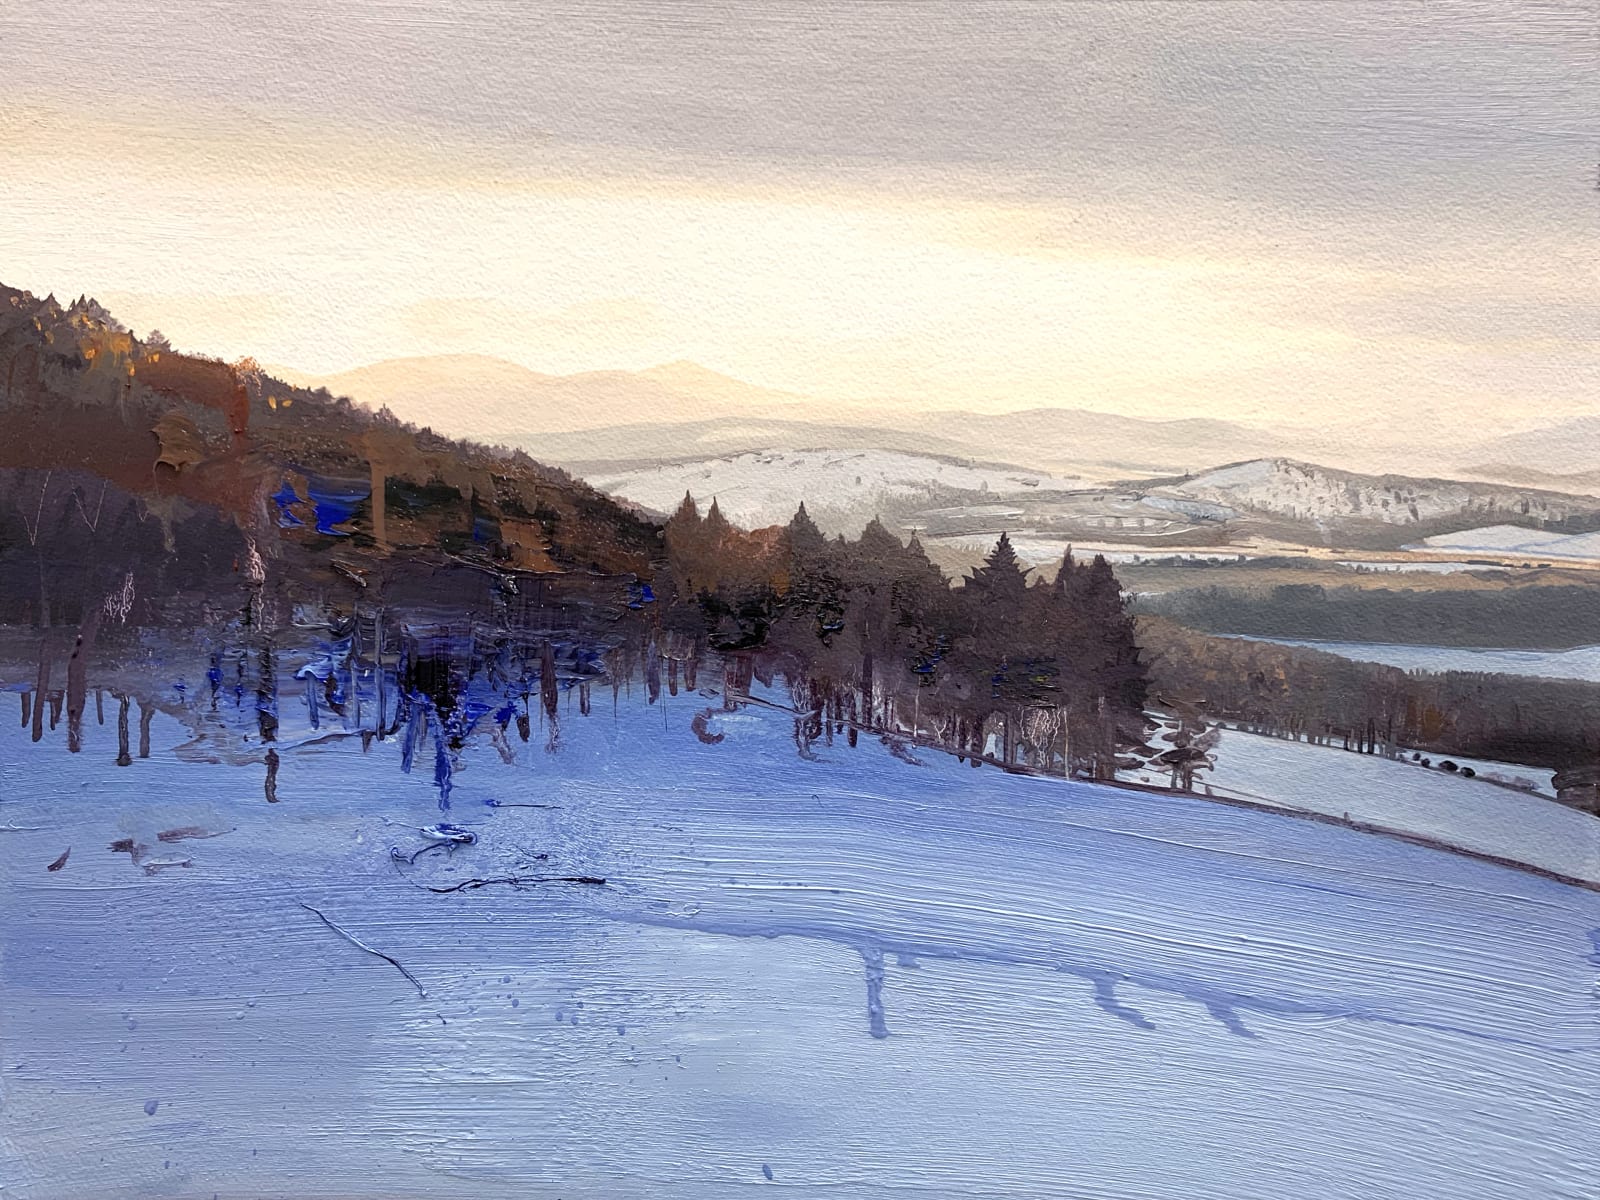 Chris Bushe RSW, Winter Sun on the Queen's View, Tarland